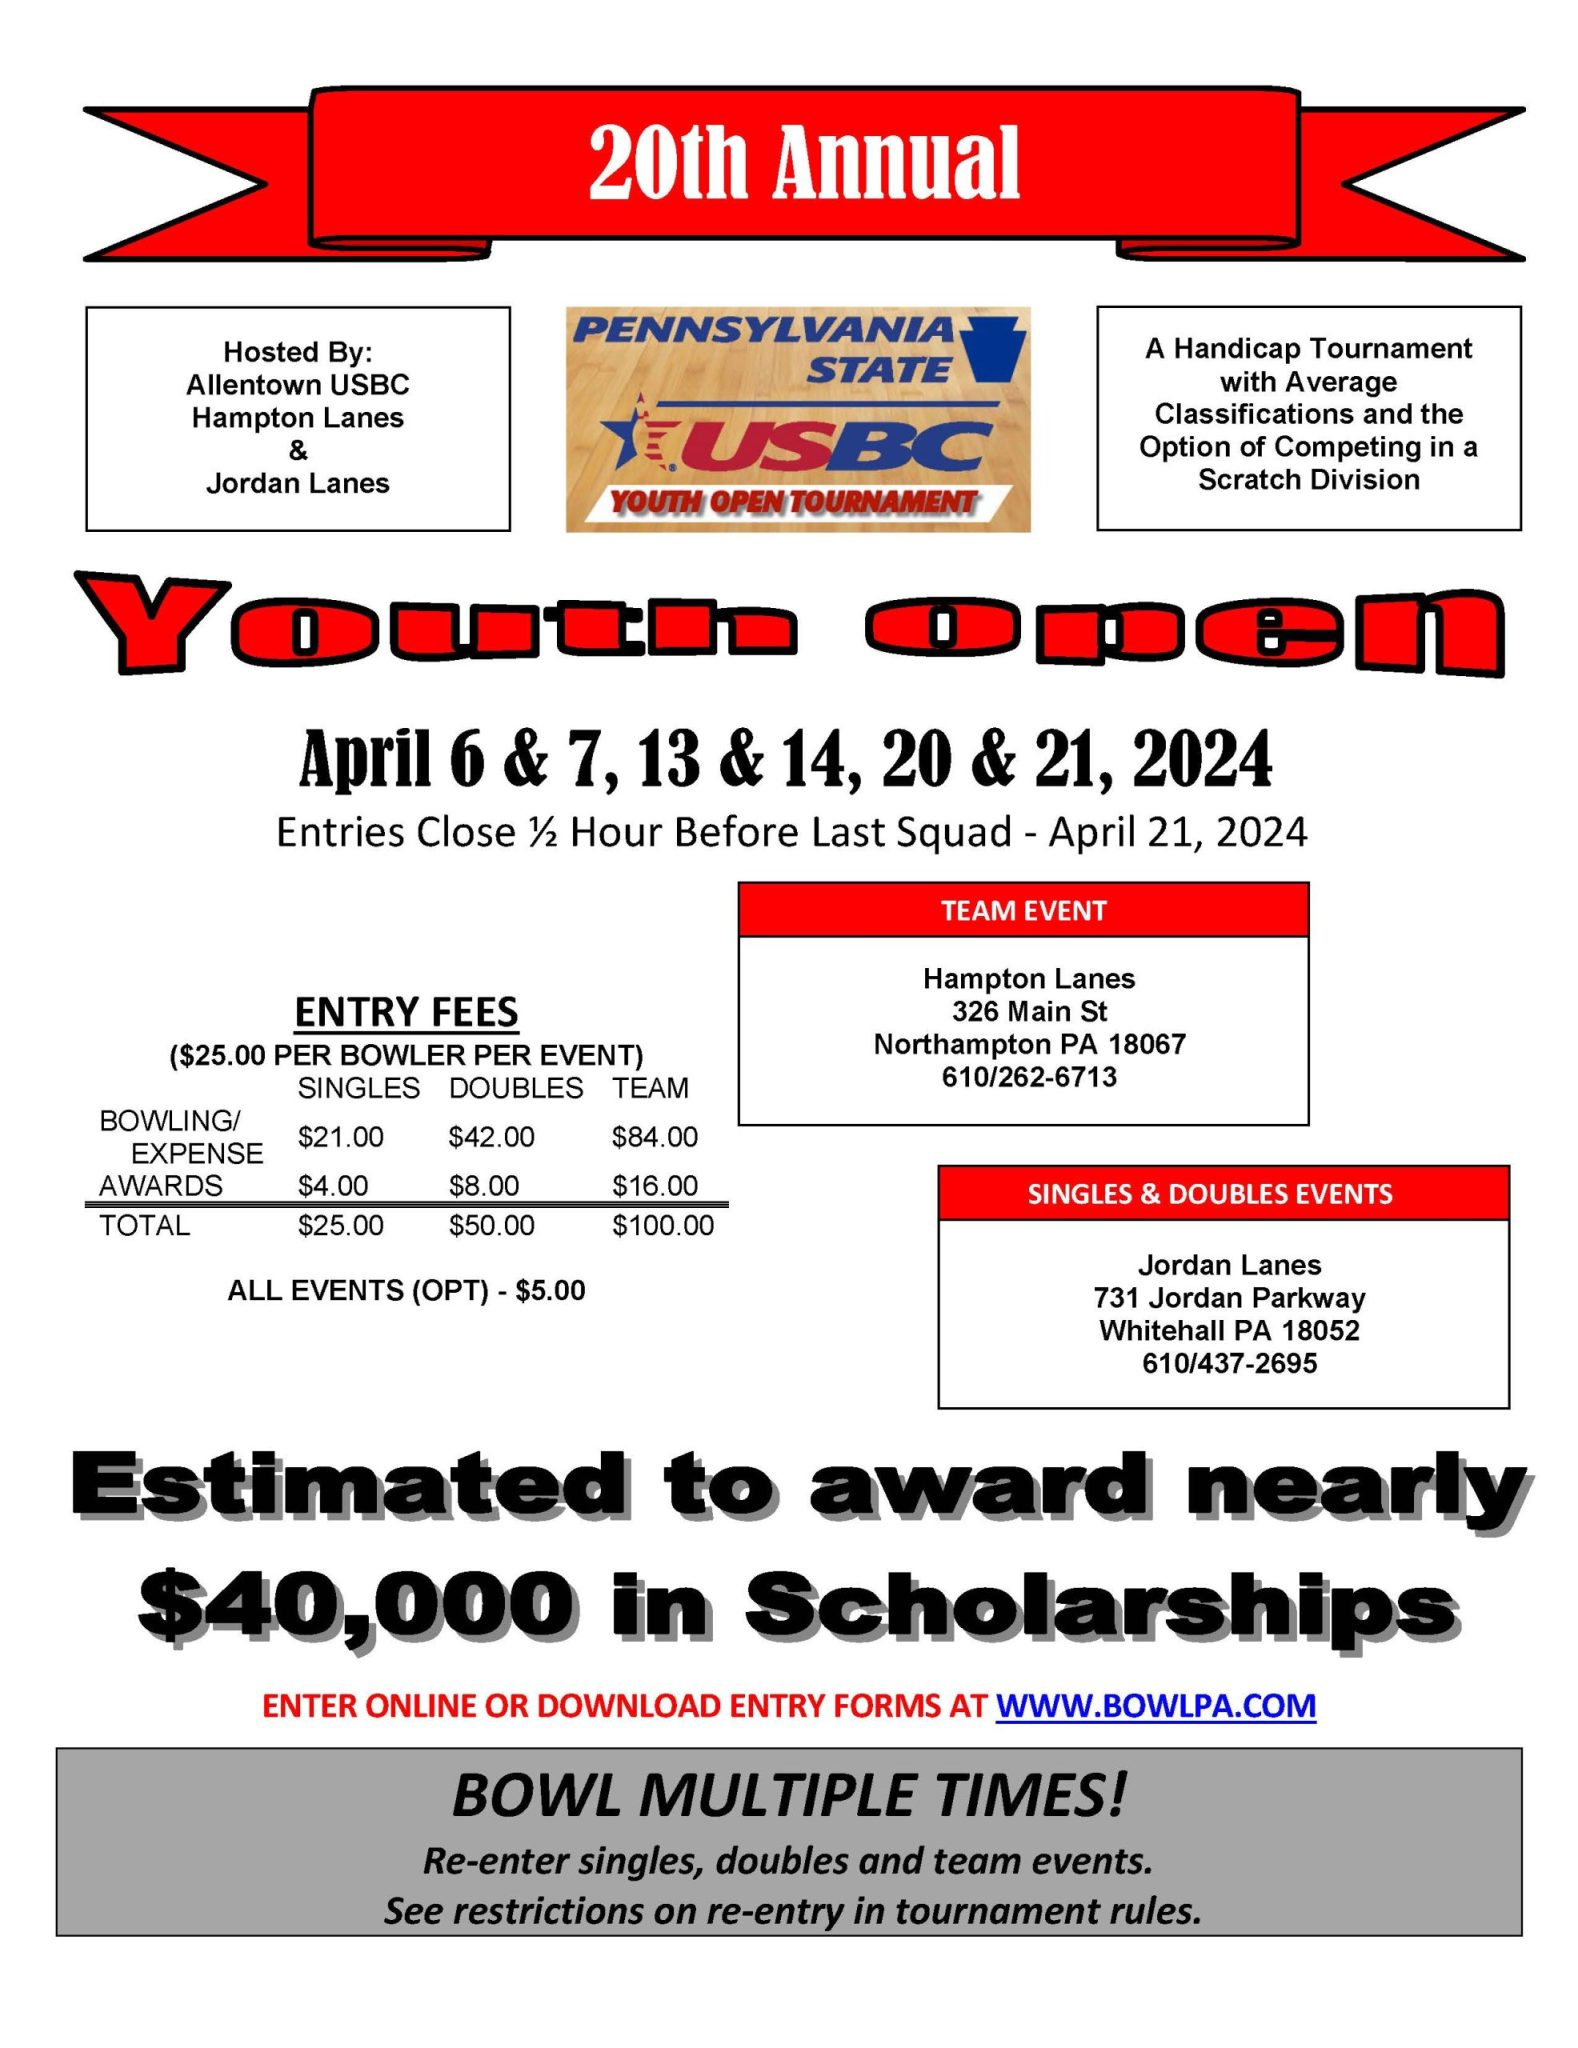 20th Annual Pennsylvania State Youth Open 3